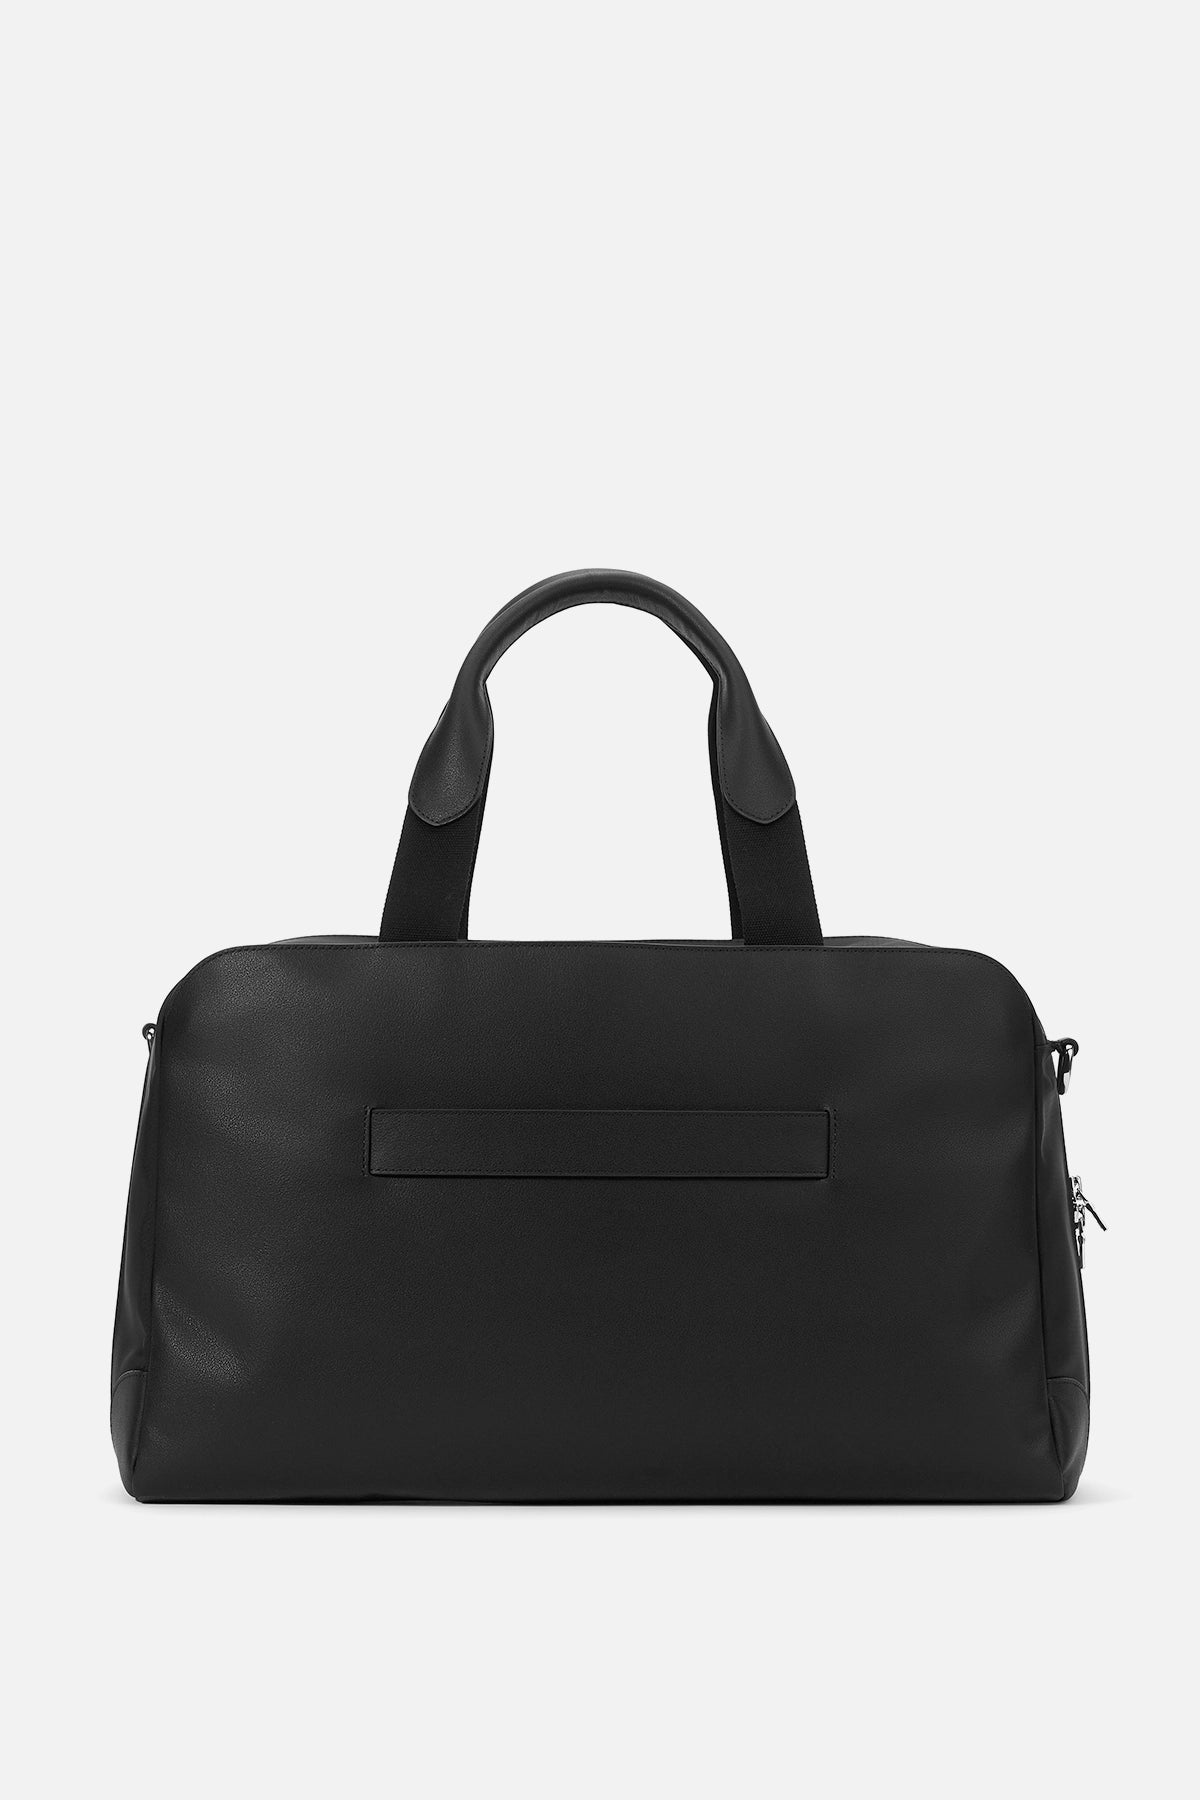 NEO SMALL LEATHER DUFFLE BAG